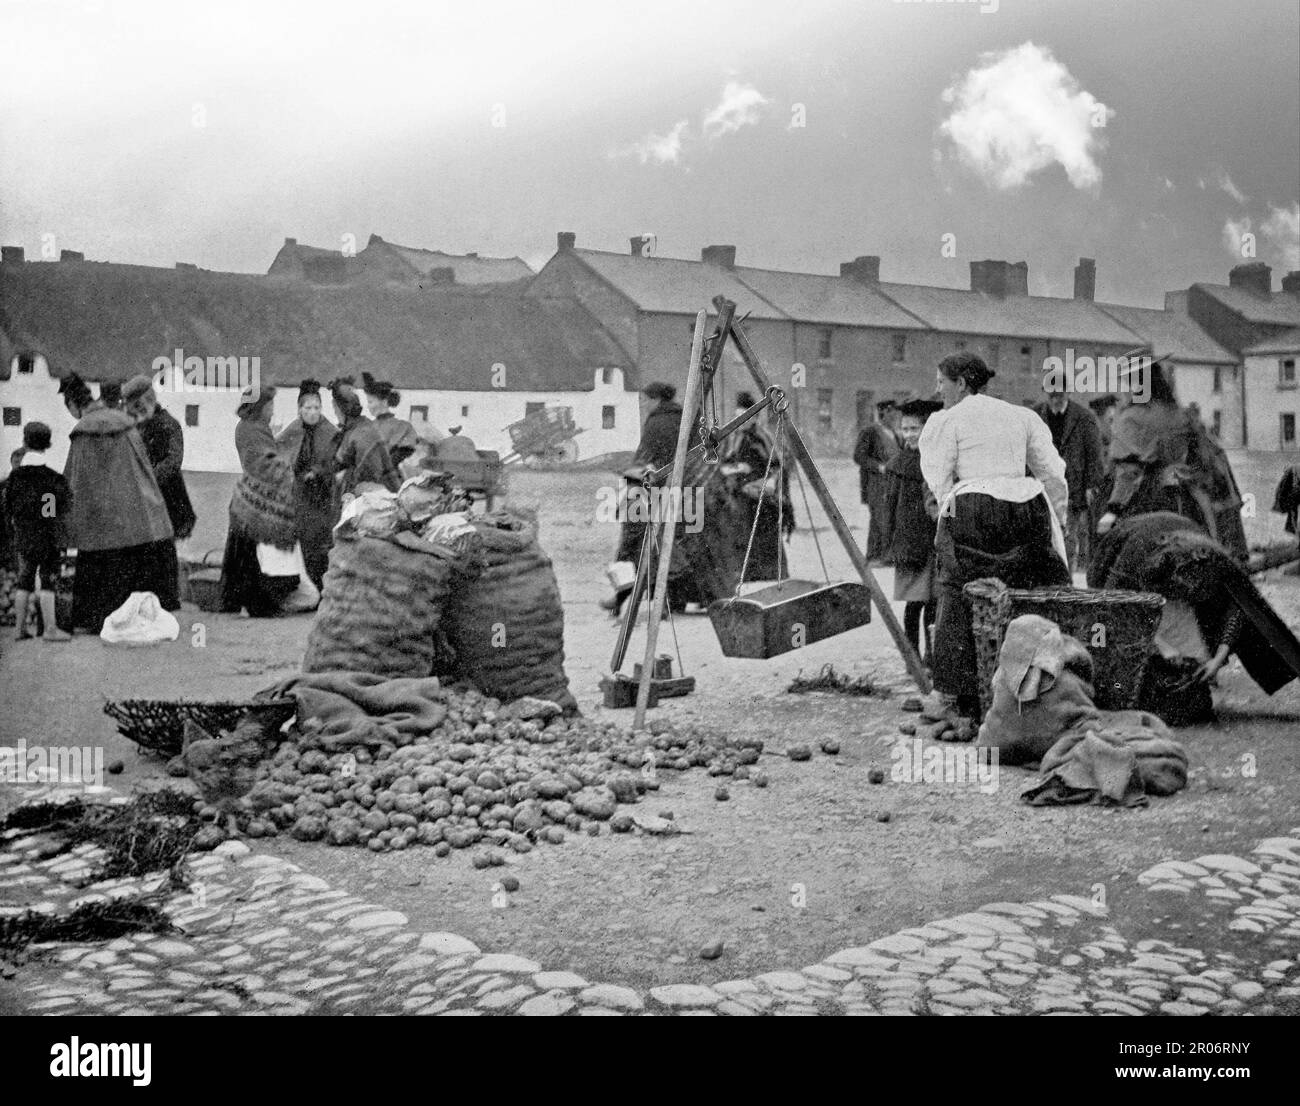 A late 19th century view of the Potato Market, in Bolton Square, in Drogheda, County Louth on the east coast of Ireland. The locals can be seen chatting and buying the ubiquitous spud. It was also the location for other markets selling butter, meat, fish and horses. Stock Photo